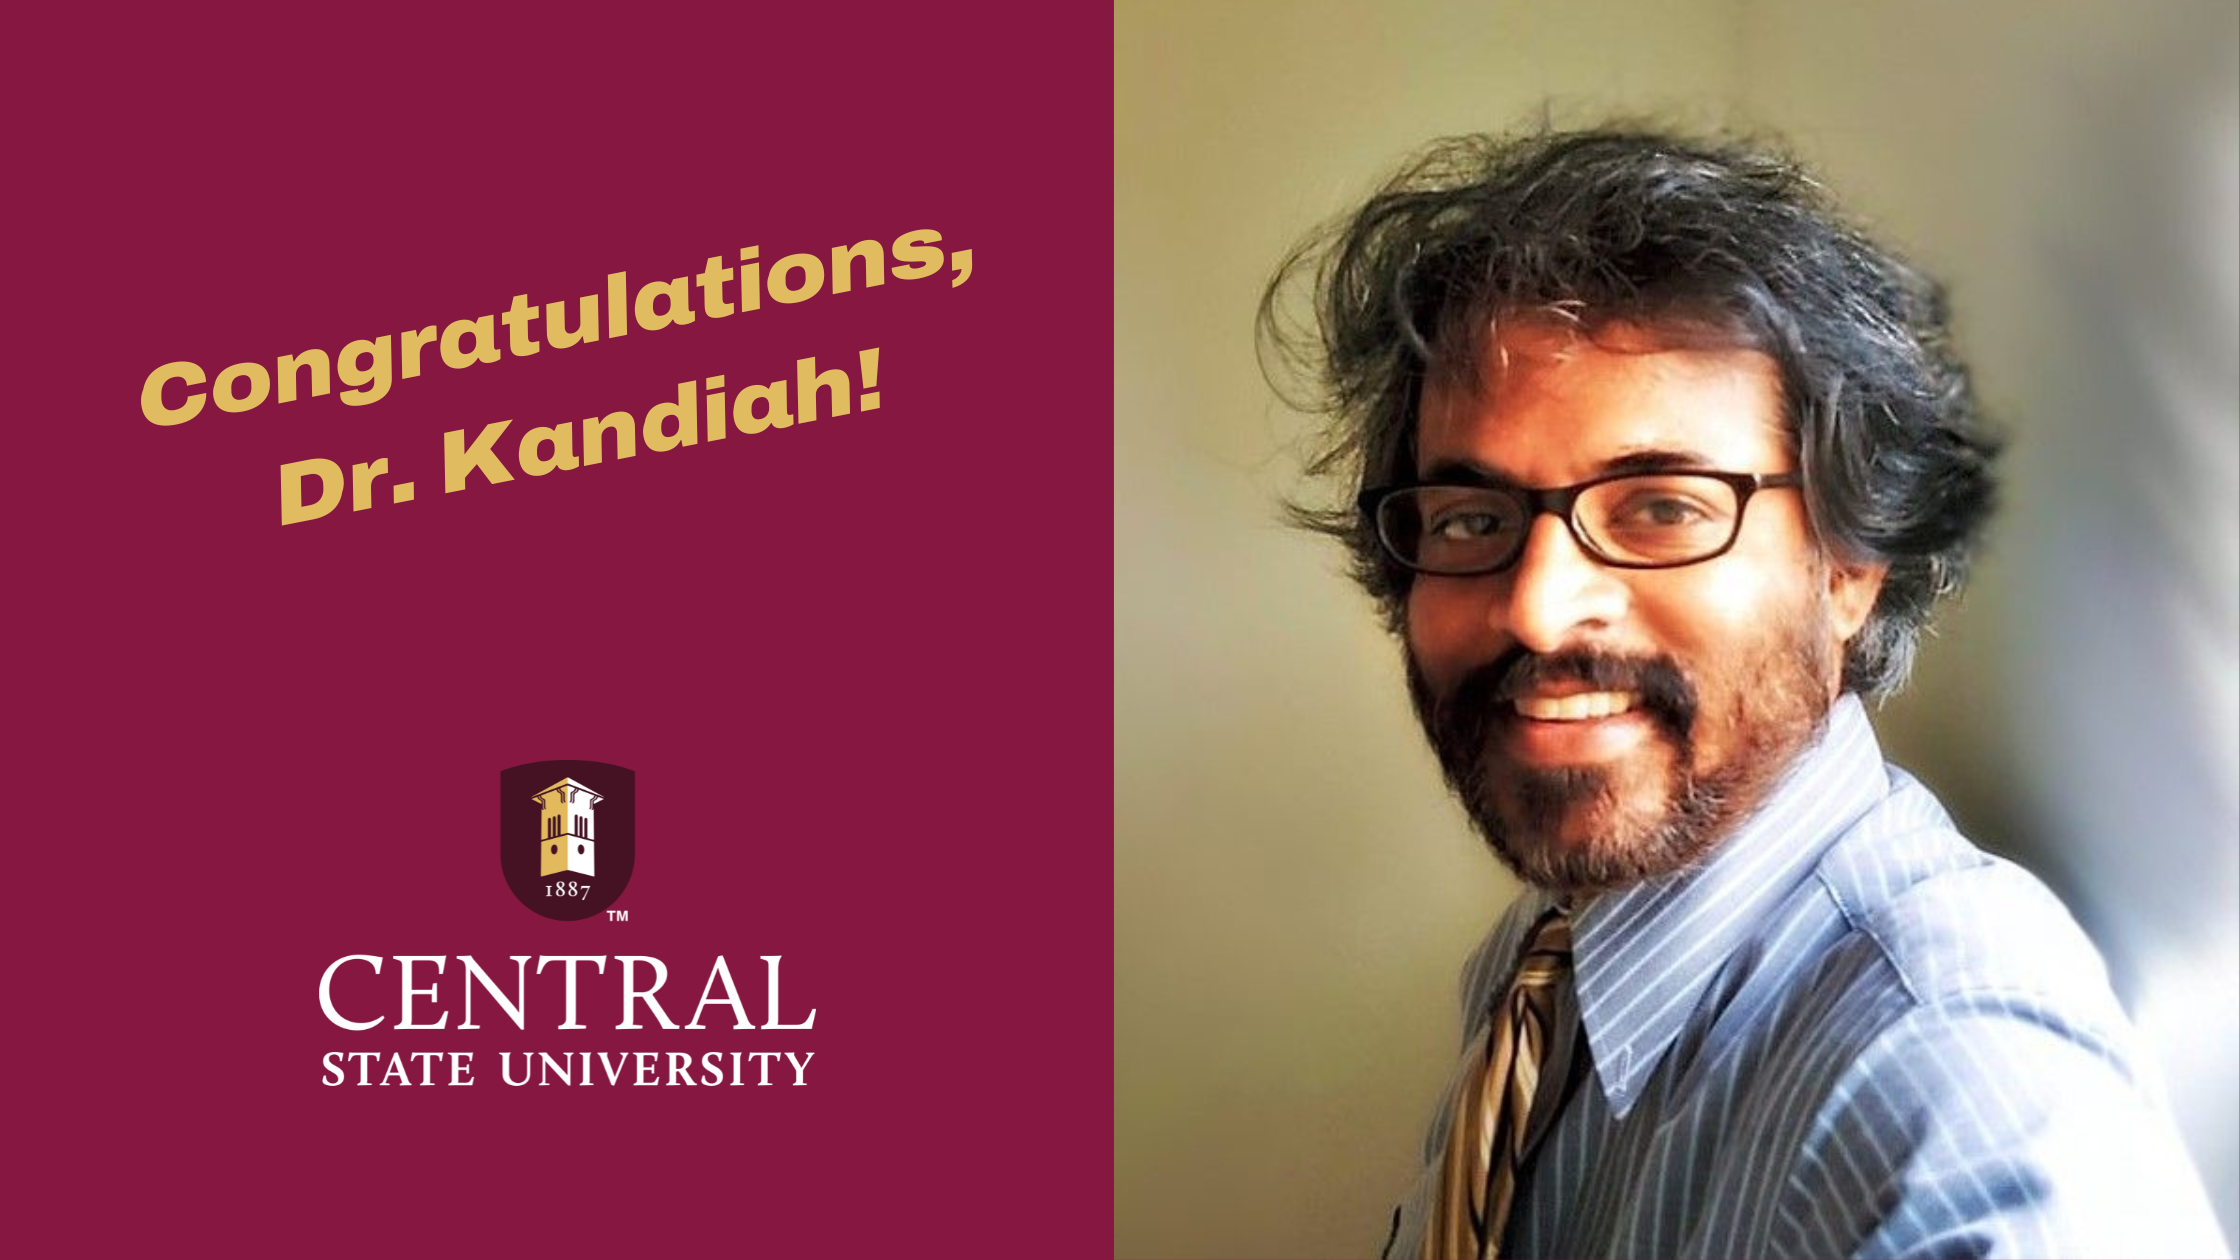 Congratulations Dr Kandiah, Central State University, photo of Dr Kandiah